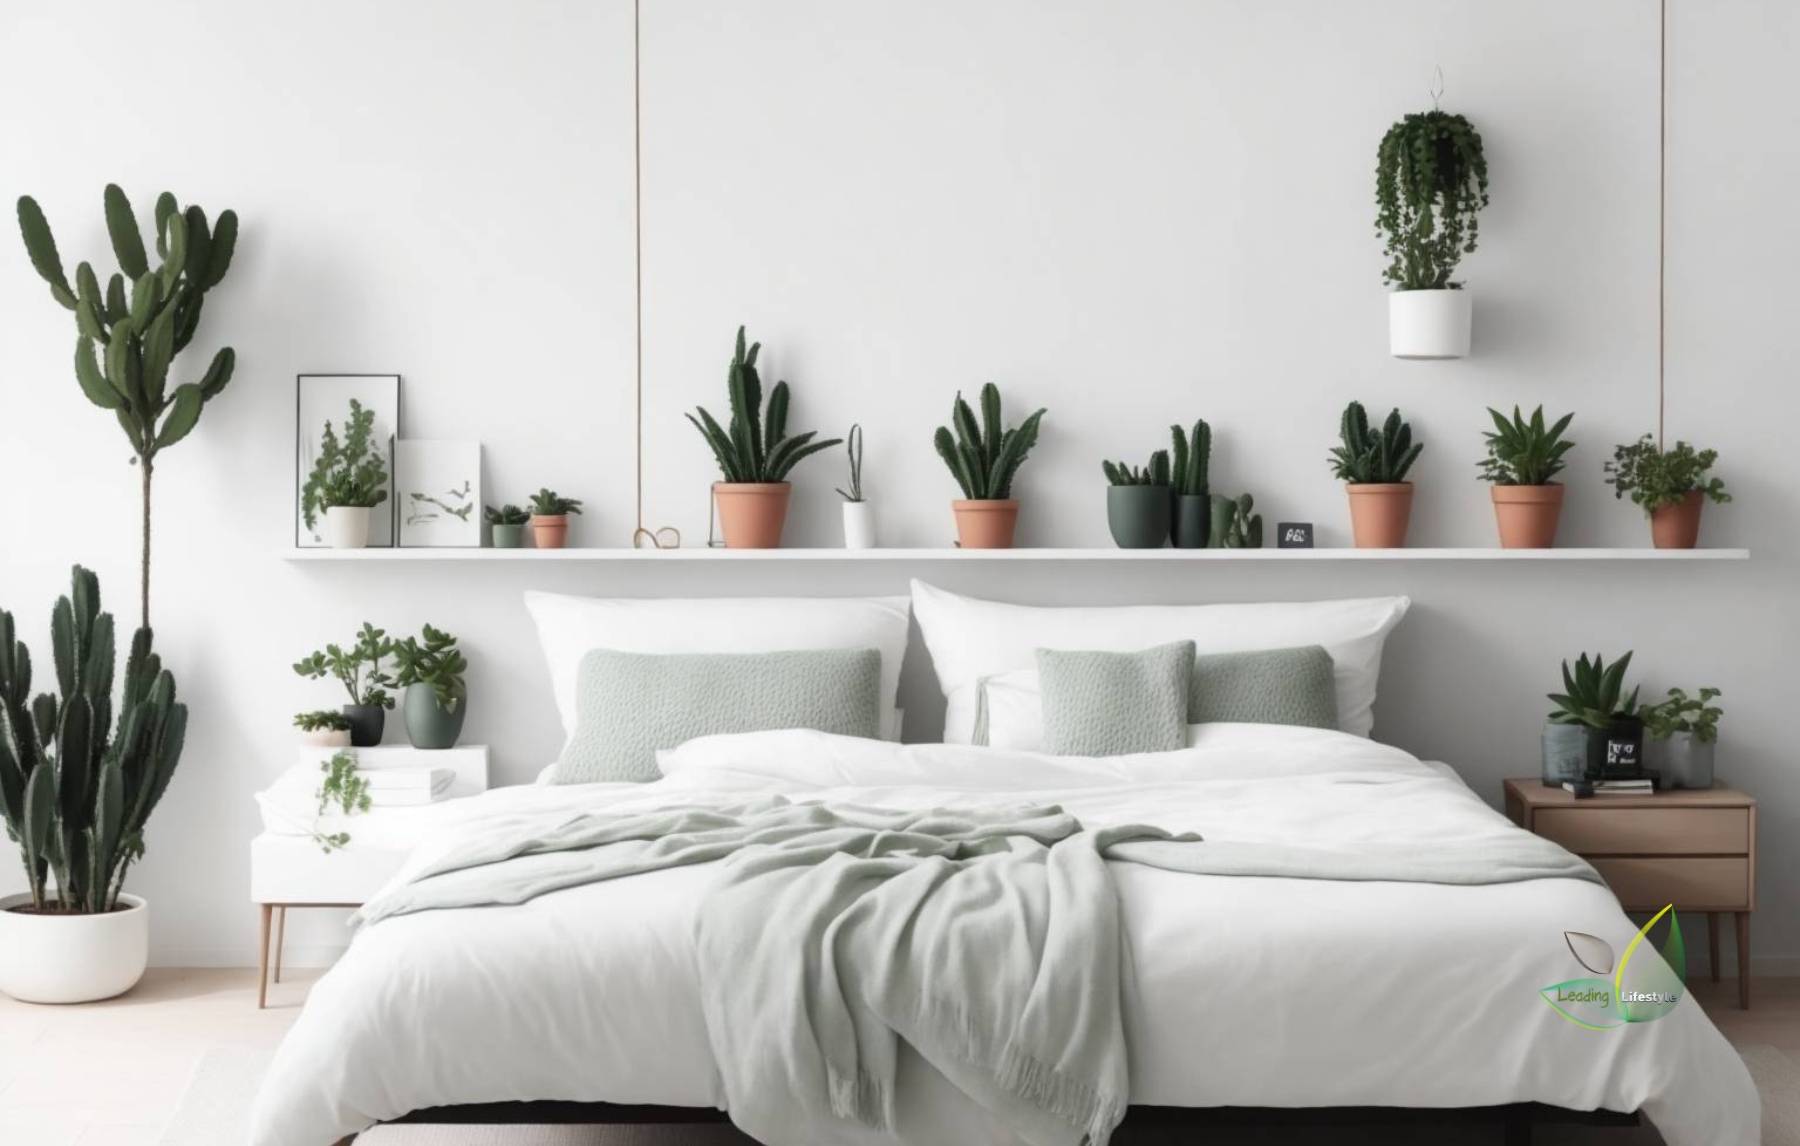 Transform Your Home With Succulents- A Decor Guide Bedroom Heavy